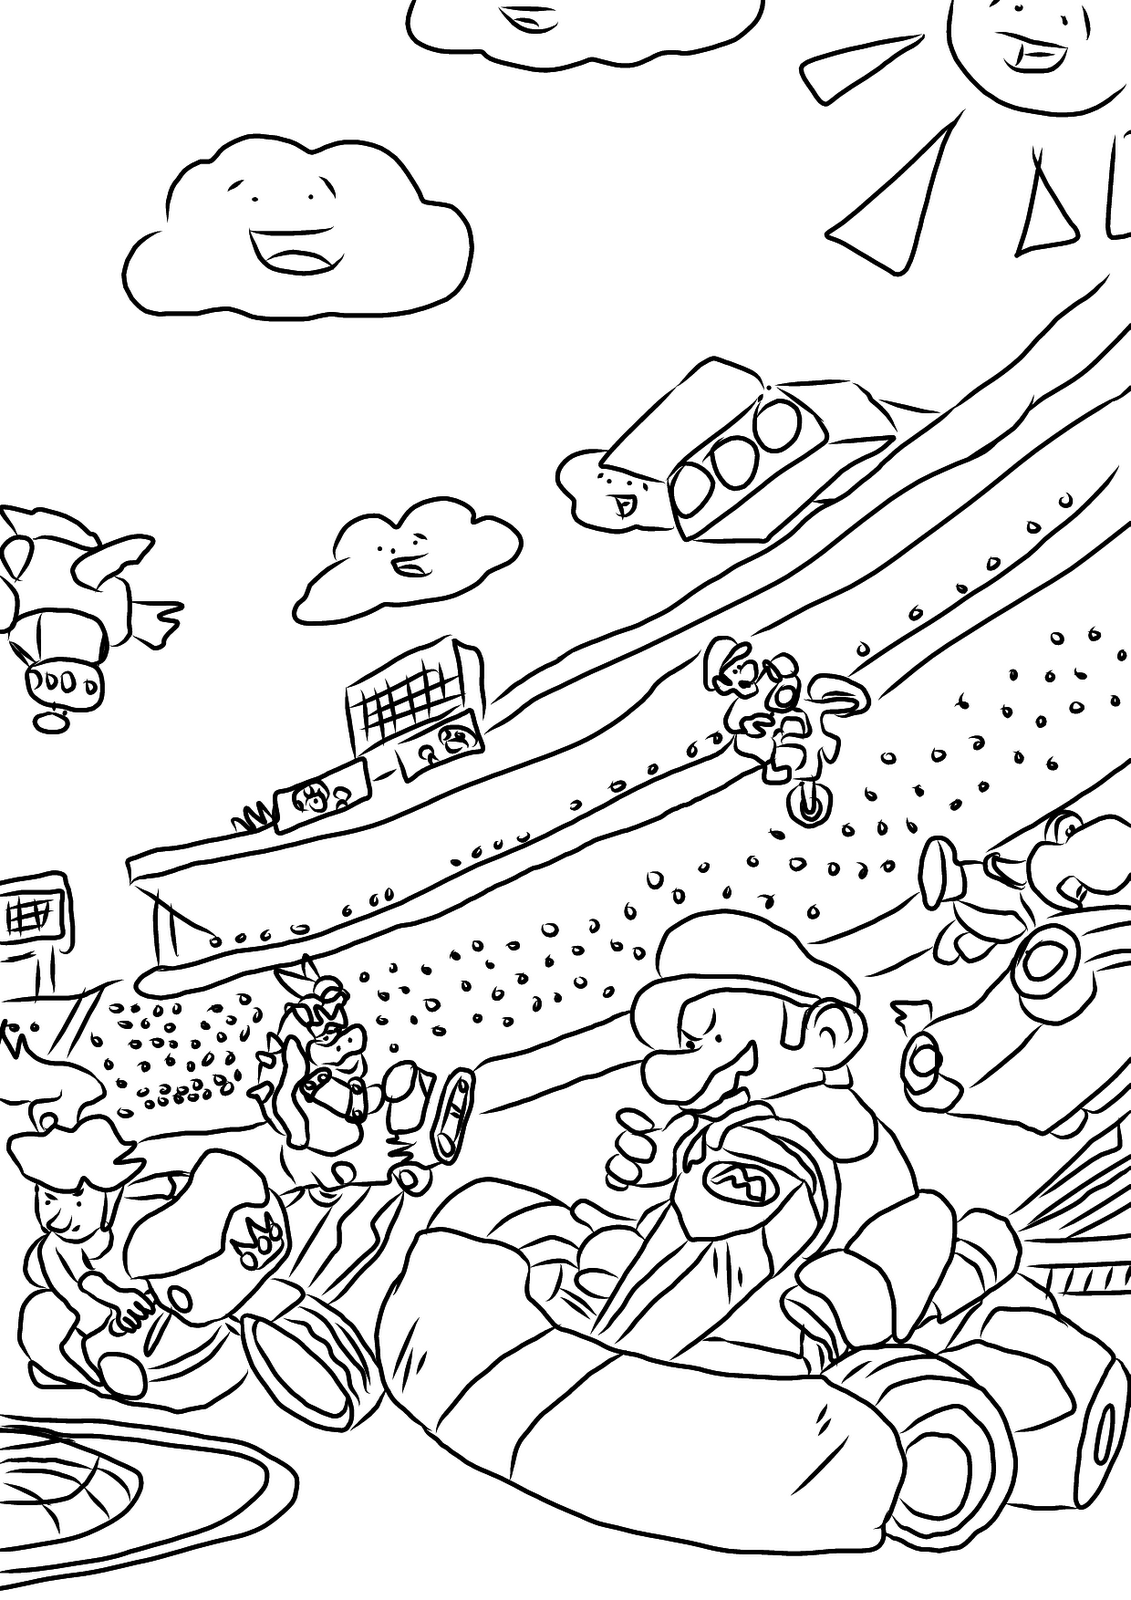 10 Pics of Super Mario Kart Coloring Pages - Mario Coloring Pages ...